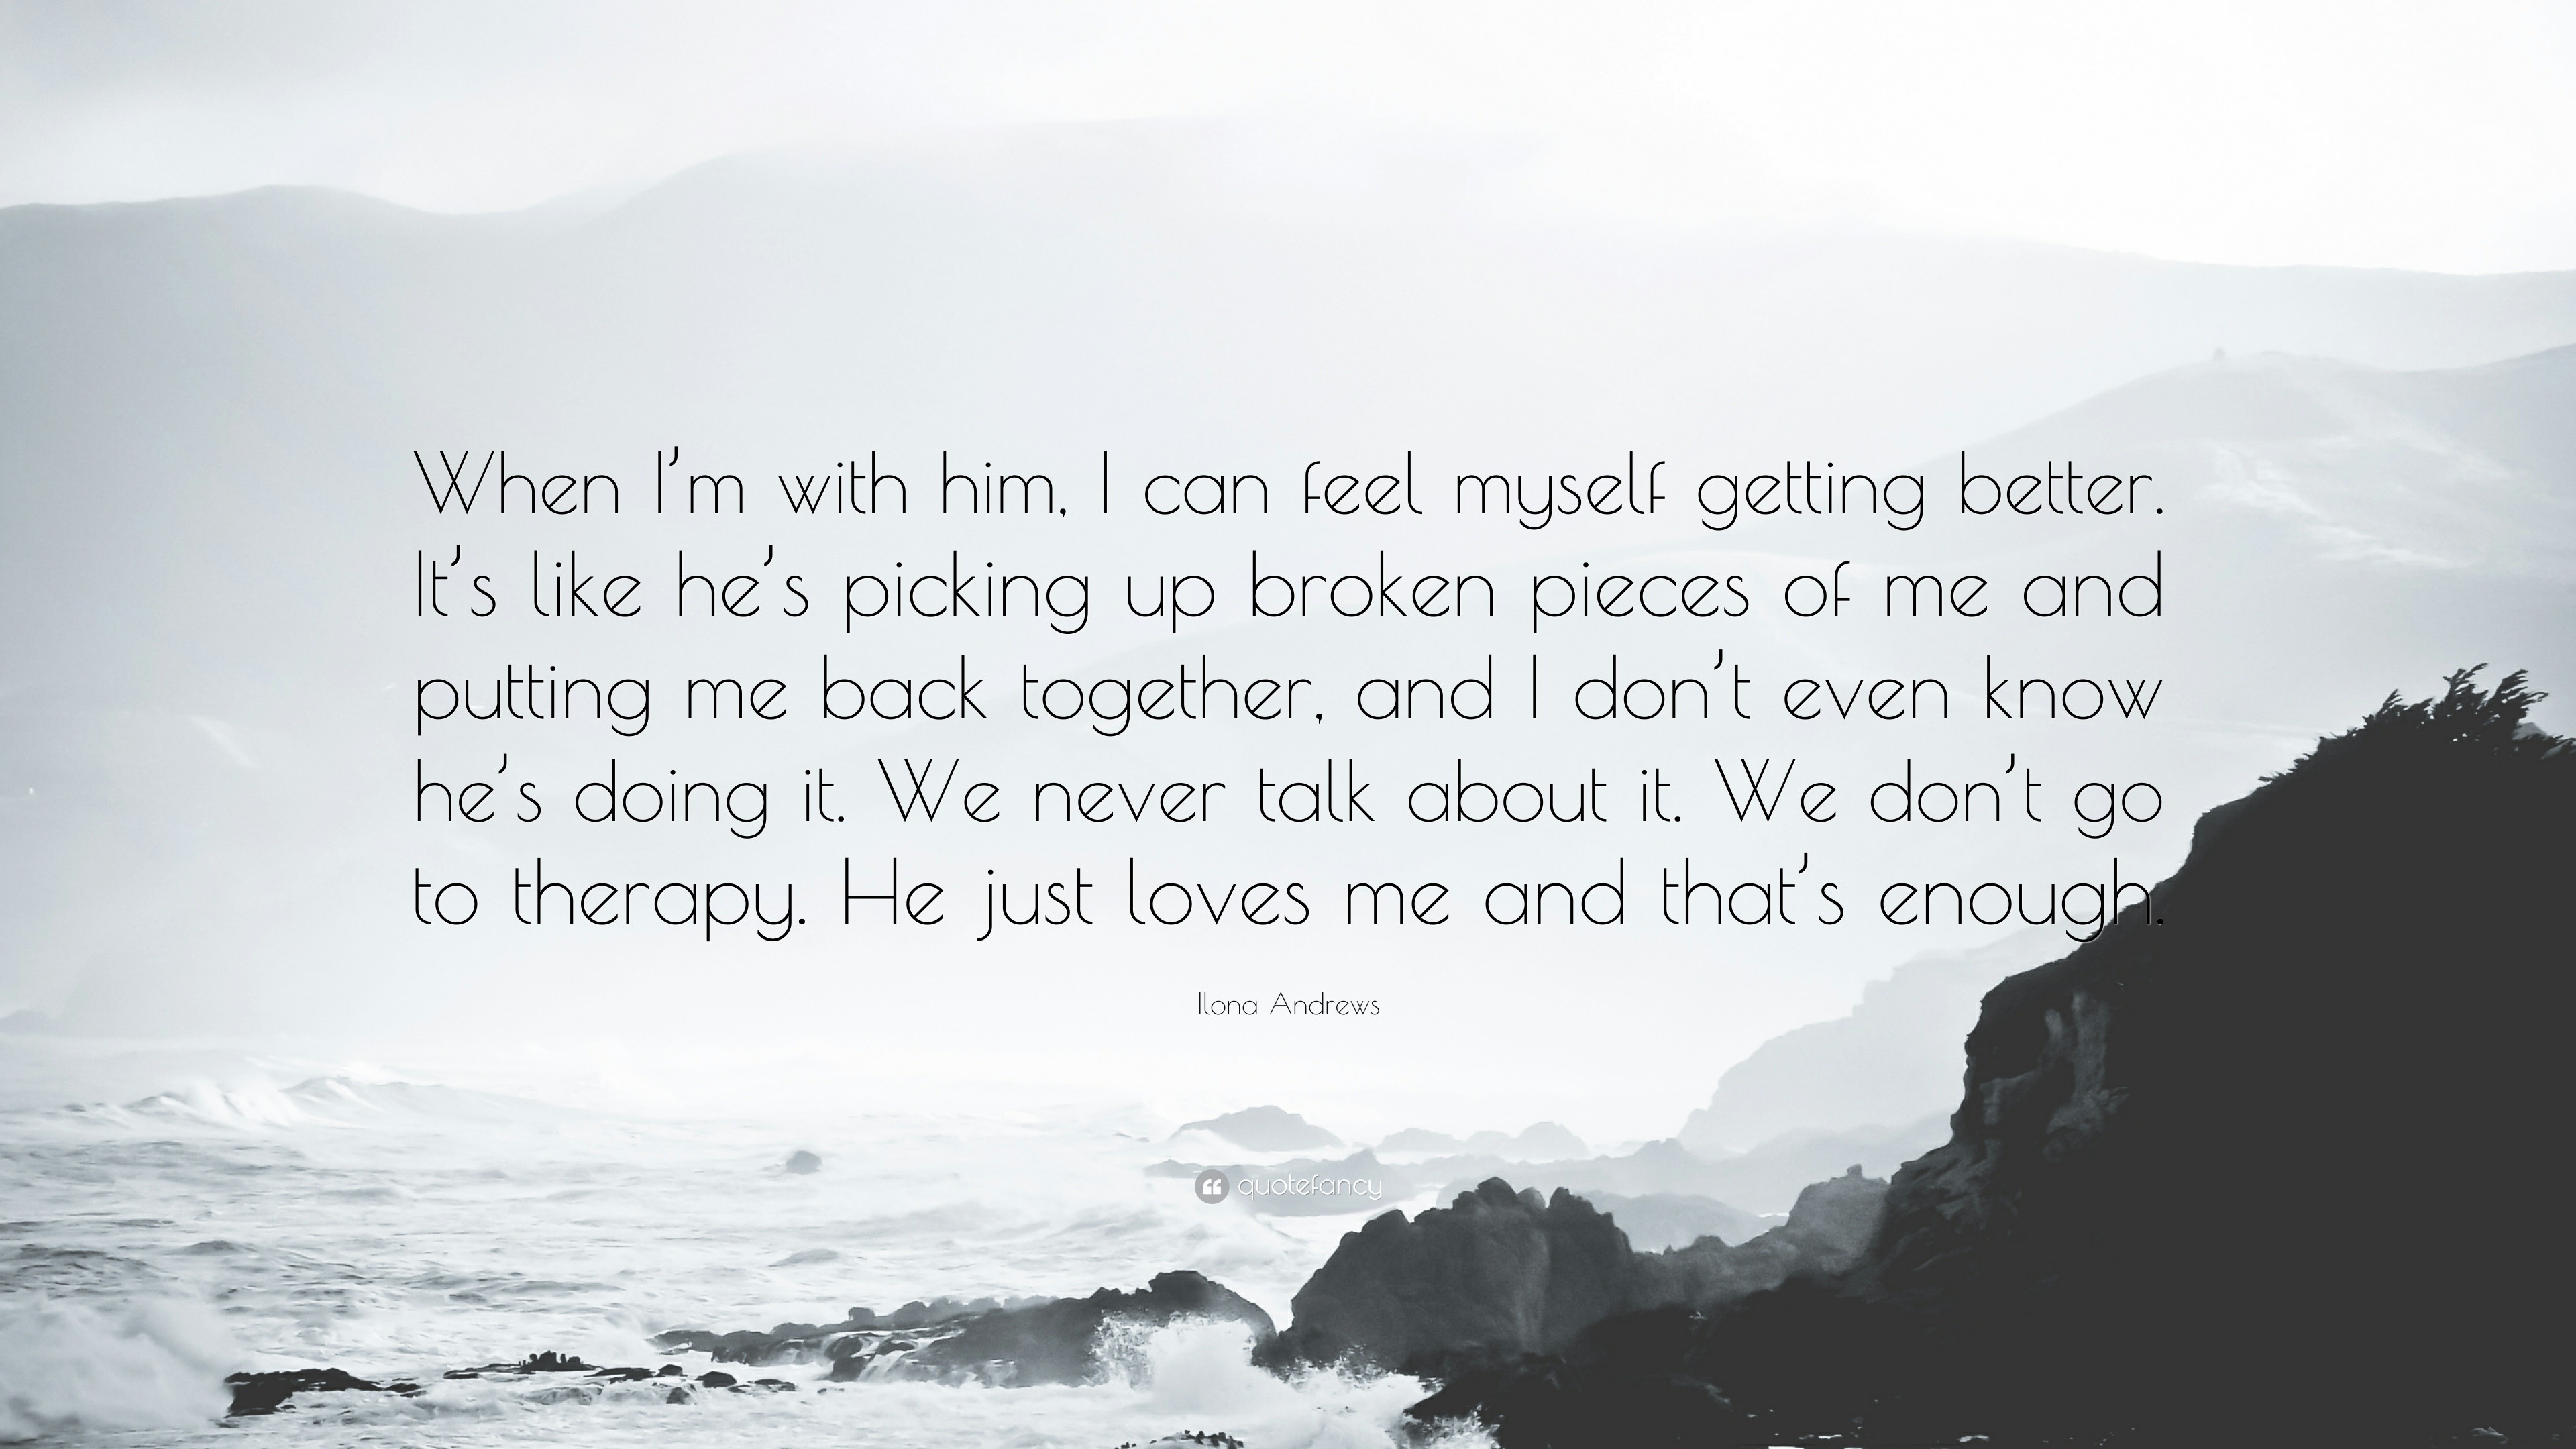 Ilona Andrews Quote: “When I'm with him, I can feel myself getting better.  It's like he's picking up broken pieces of me and putting me back t”